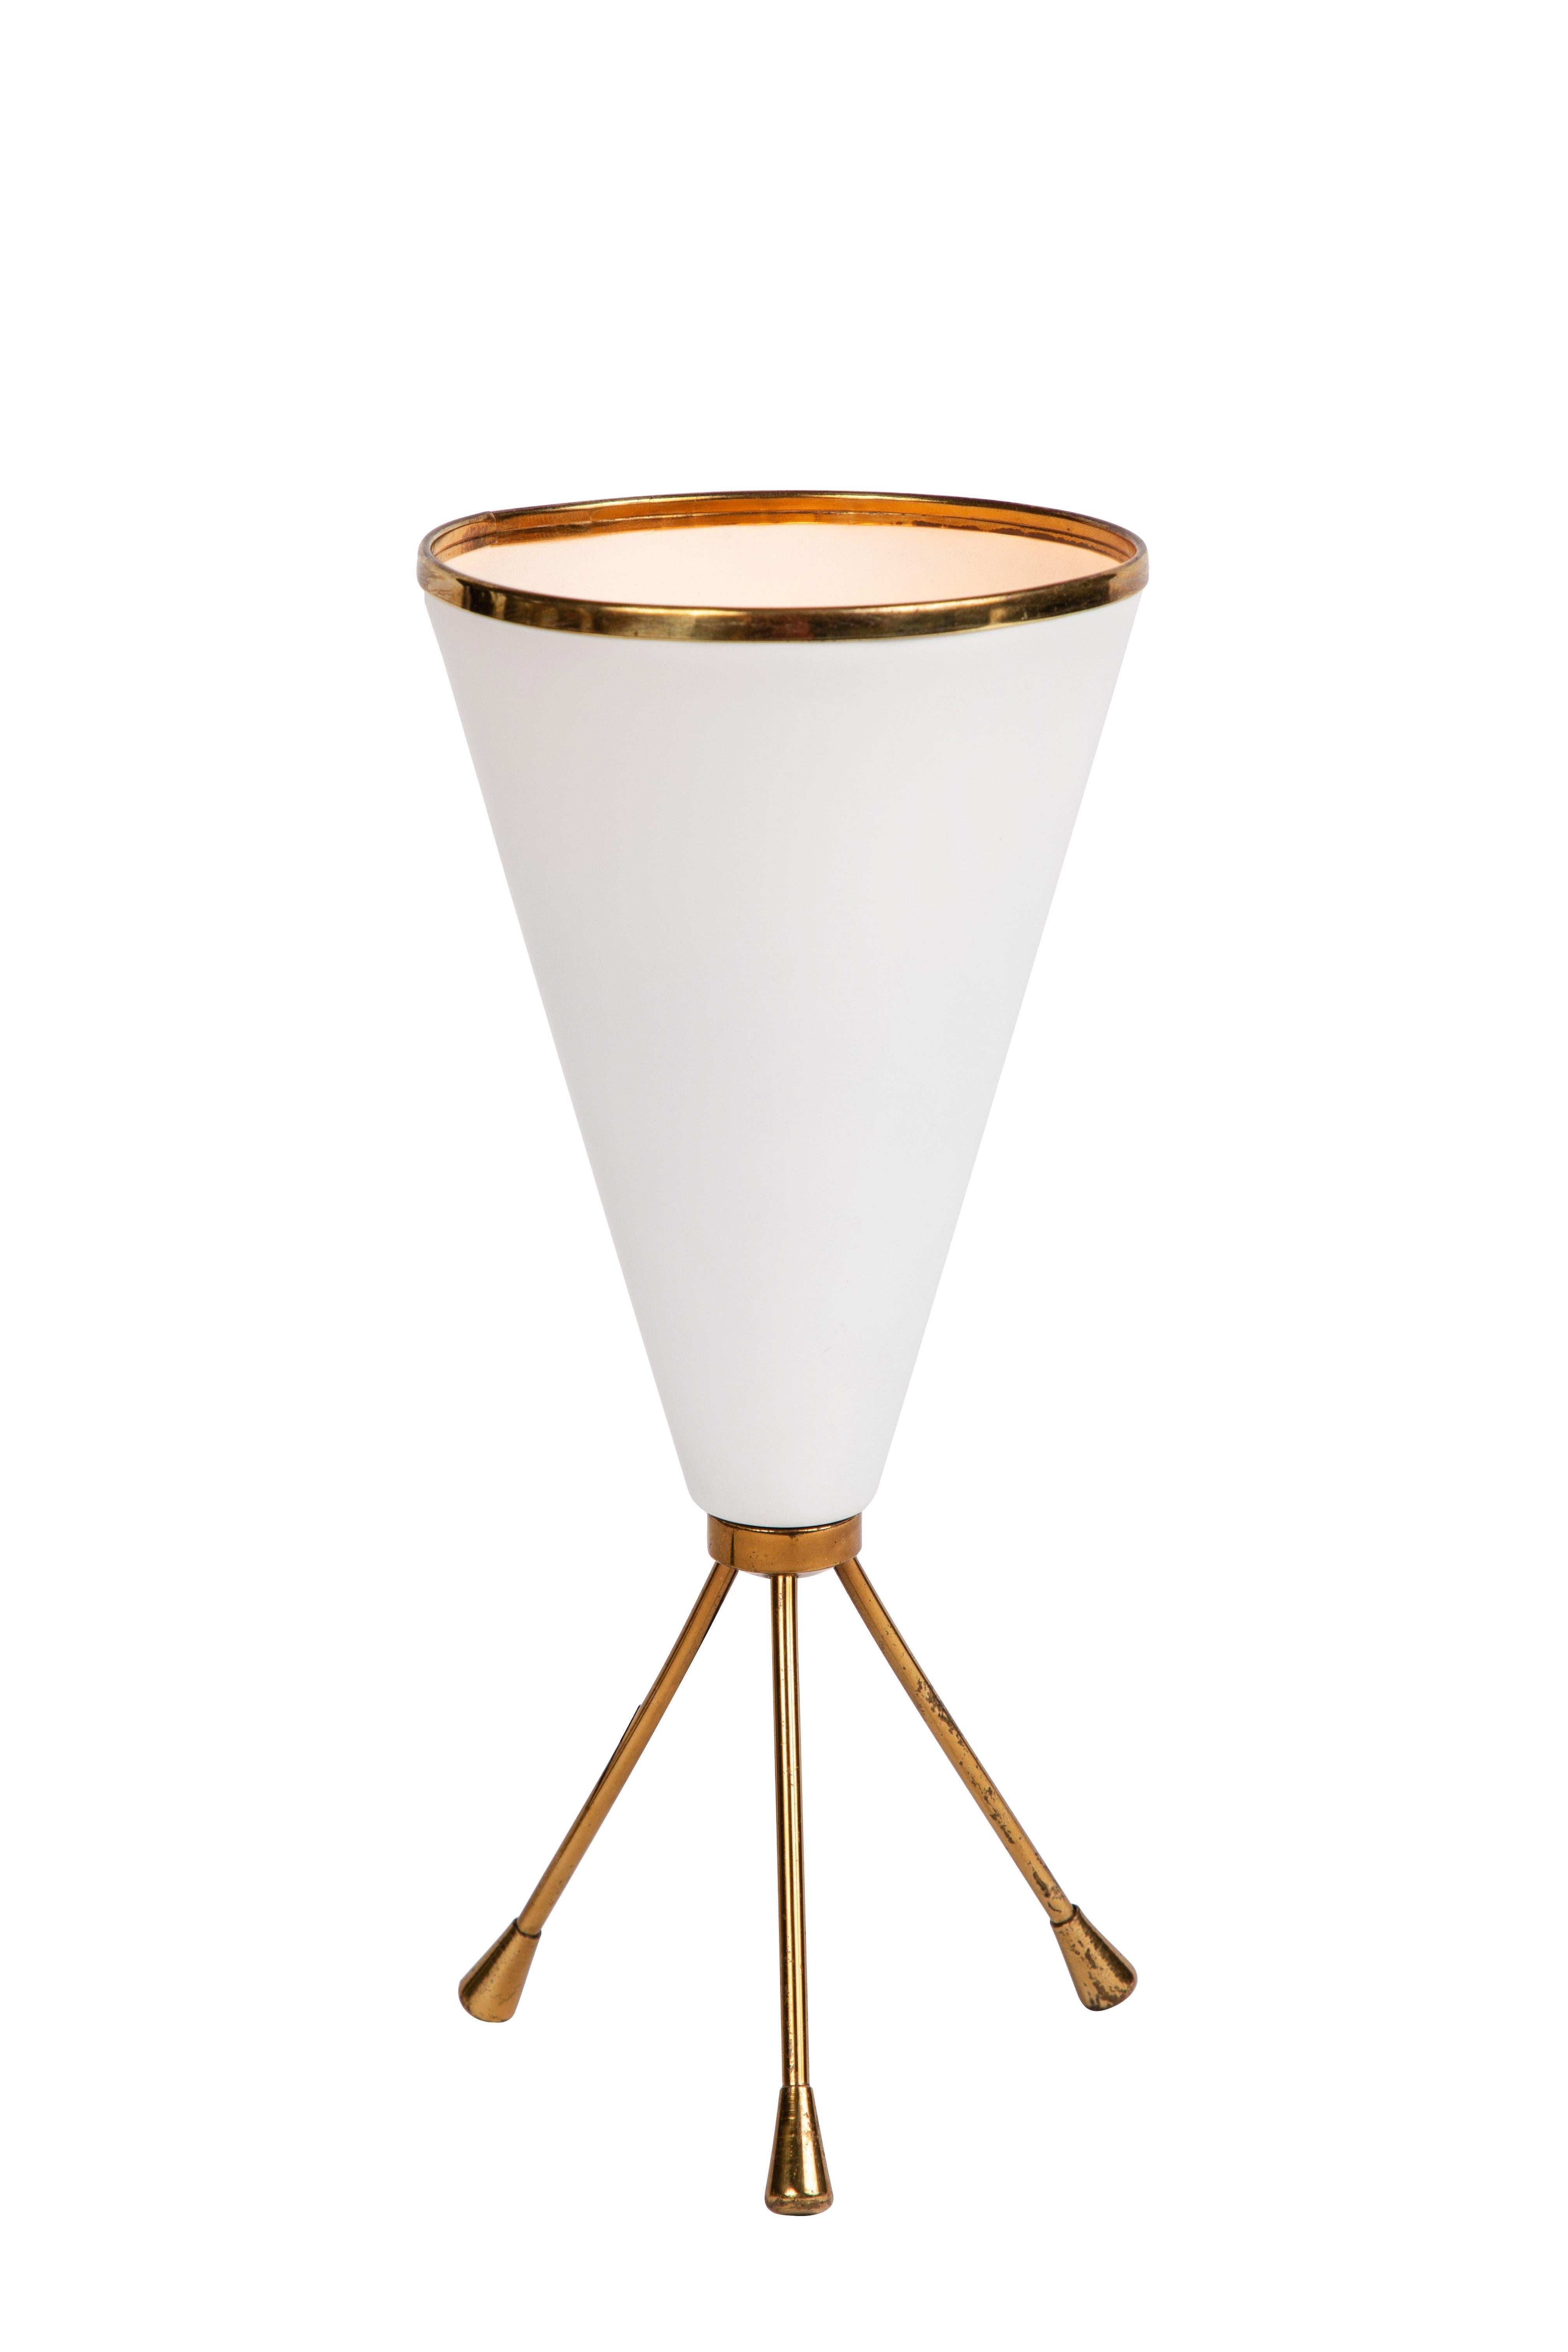 1950s tripod table lamp in white and brass attributed to Stilnovo. This elegantly sculptural table lamp is characteristic of the highly refined Italian lighting design aesthetics of the midcentury era as embodied by the legendary firm of